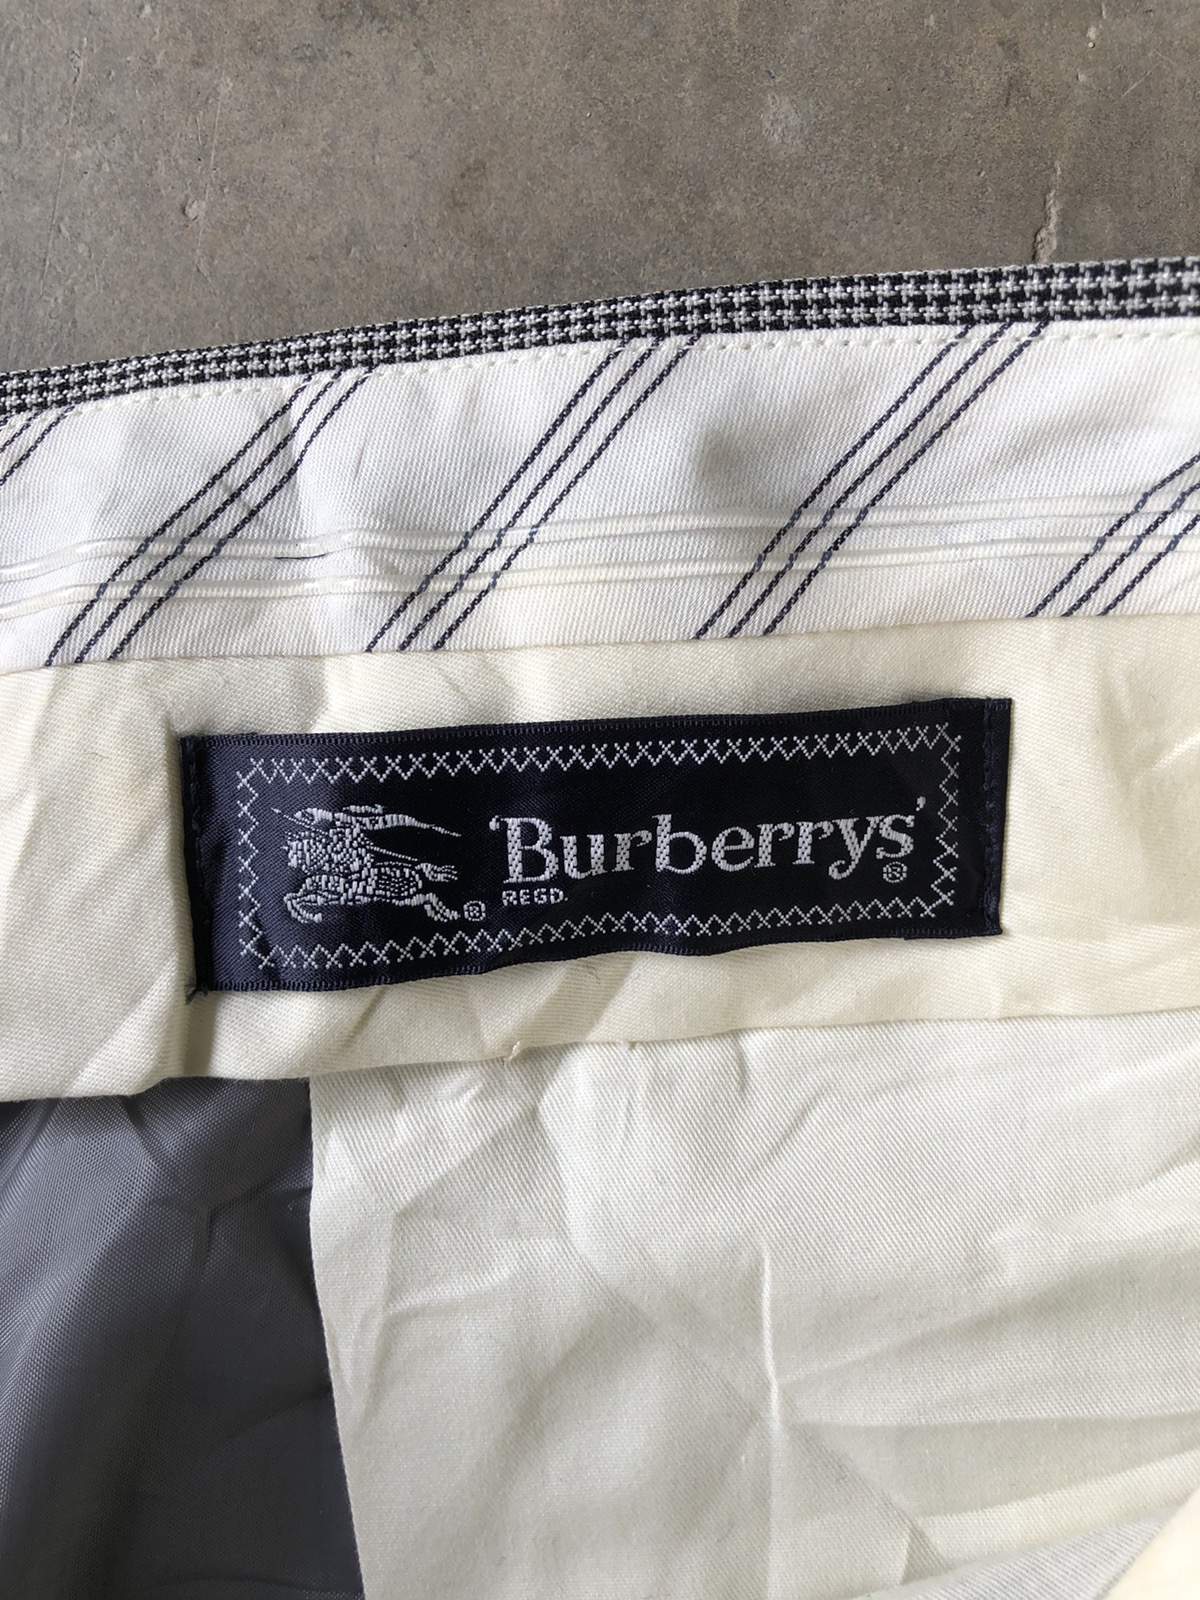 Vintage Burberry’s Baggy Casual Pant - 7